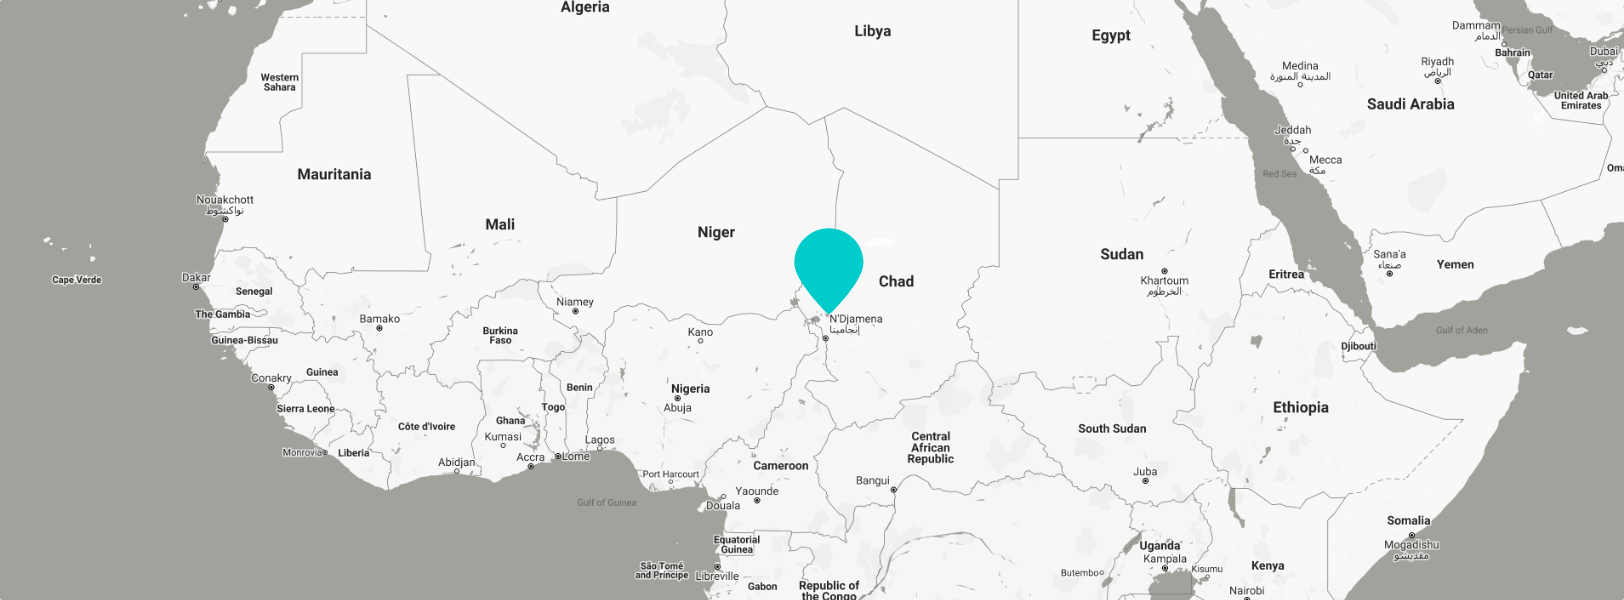 Sealr in West Africa Activity Monitoring